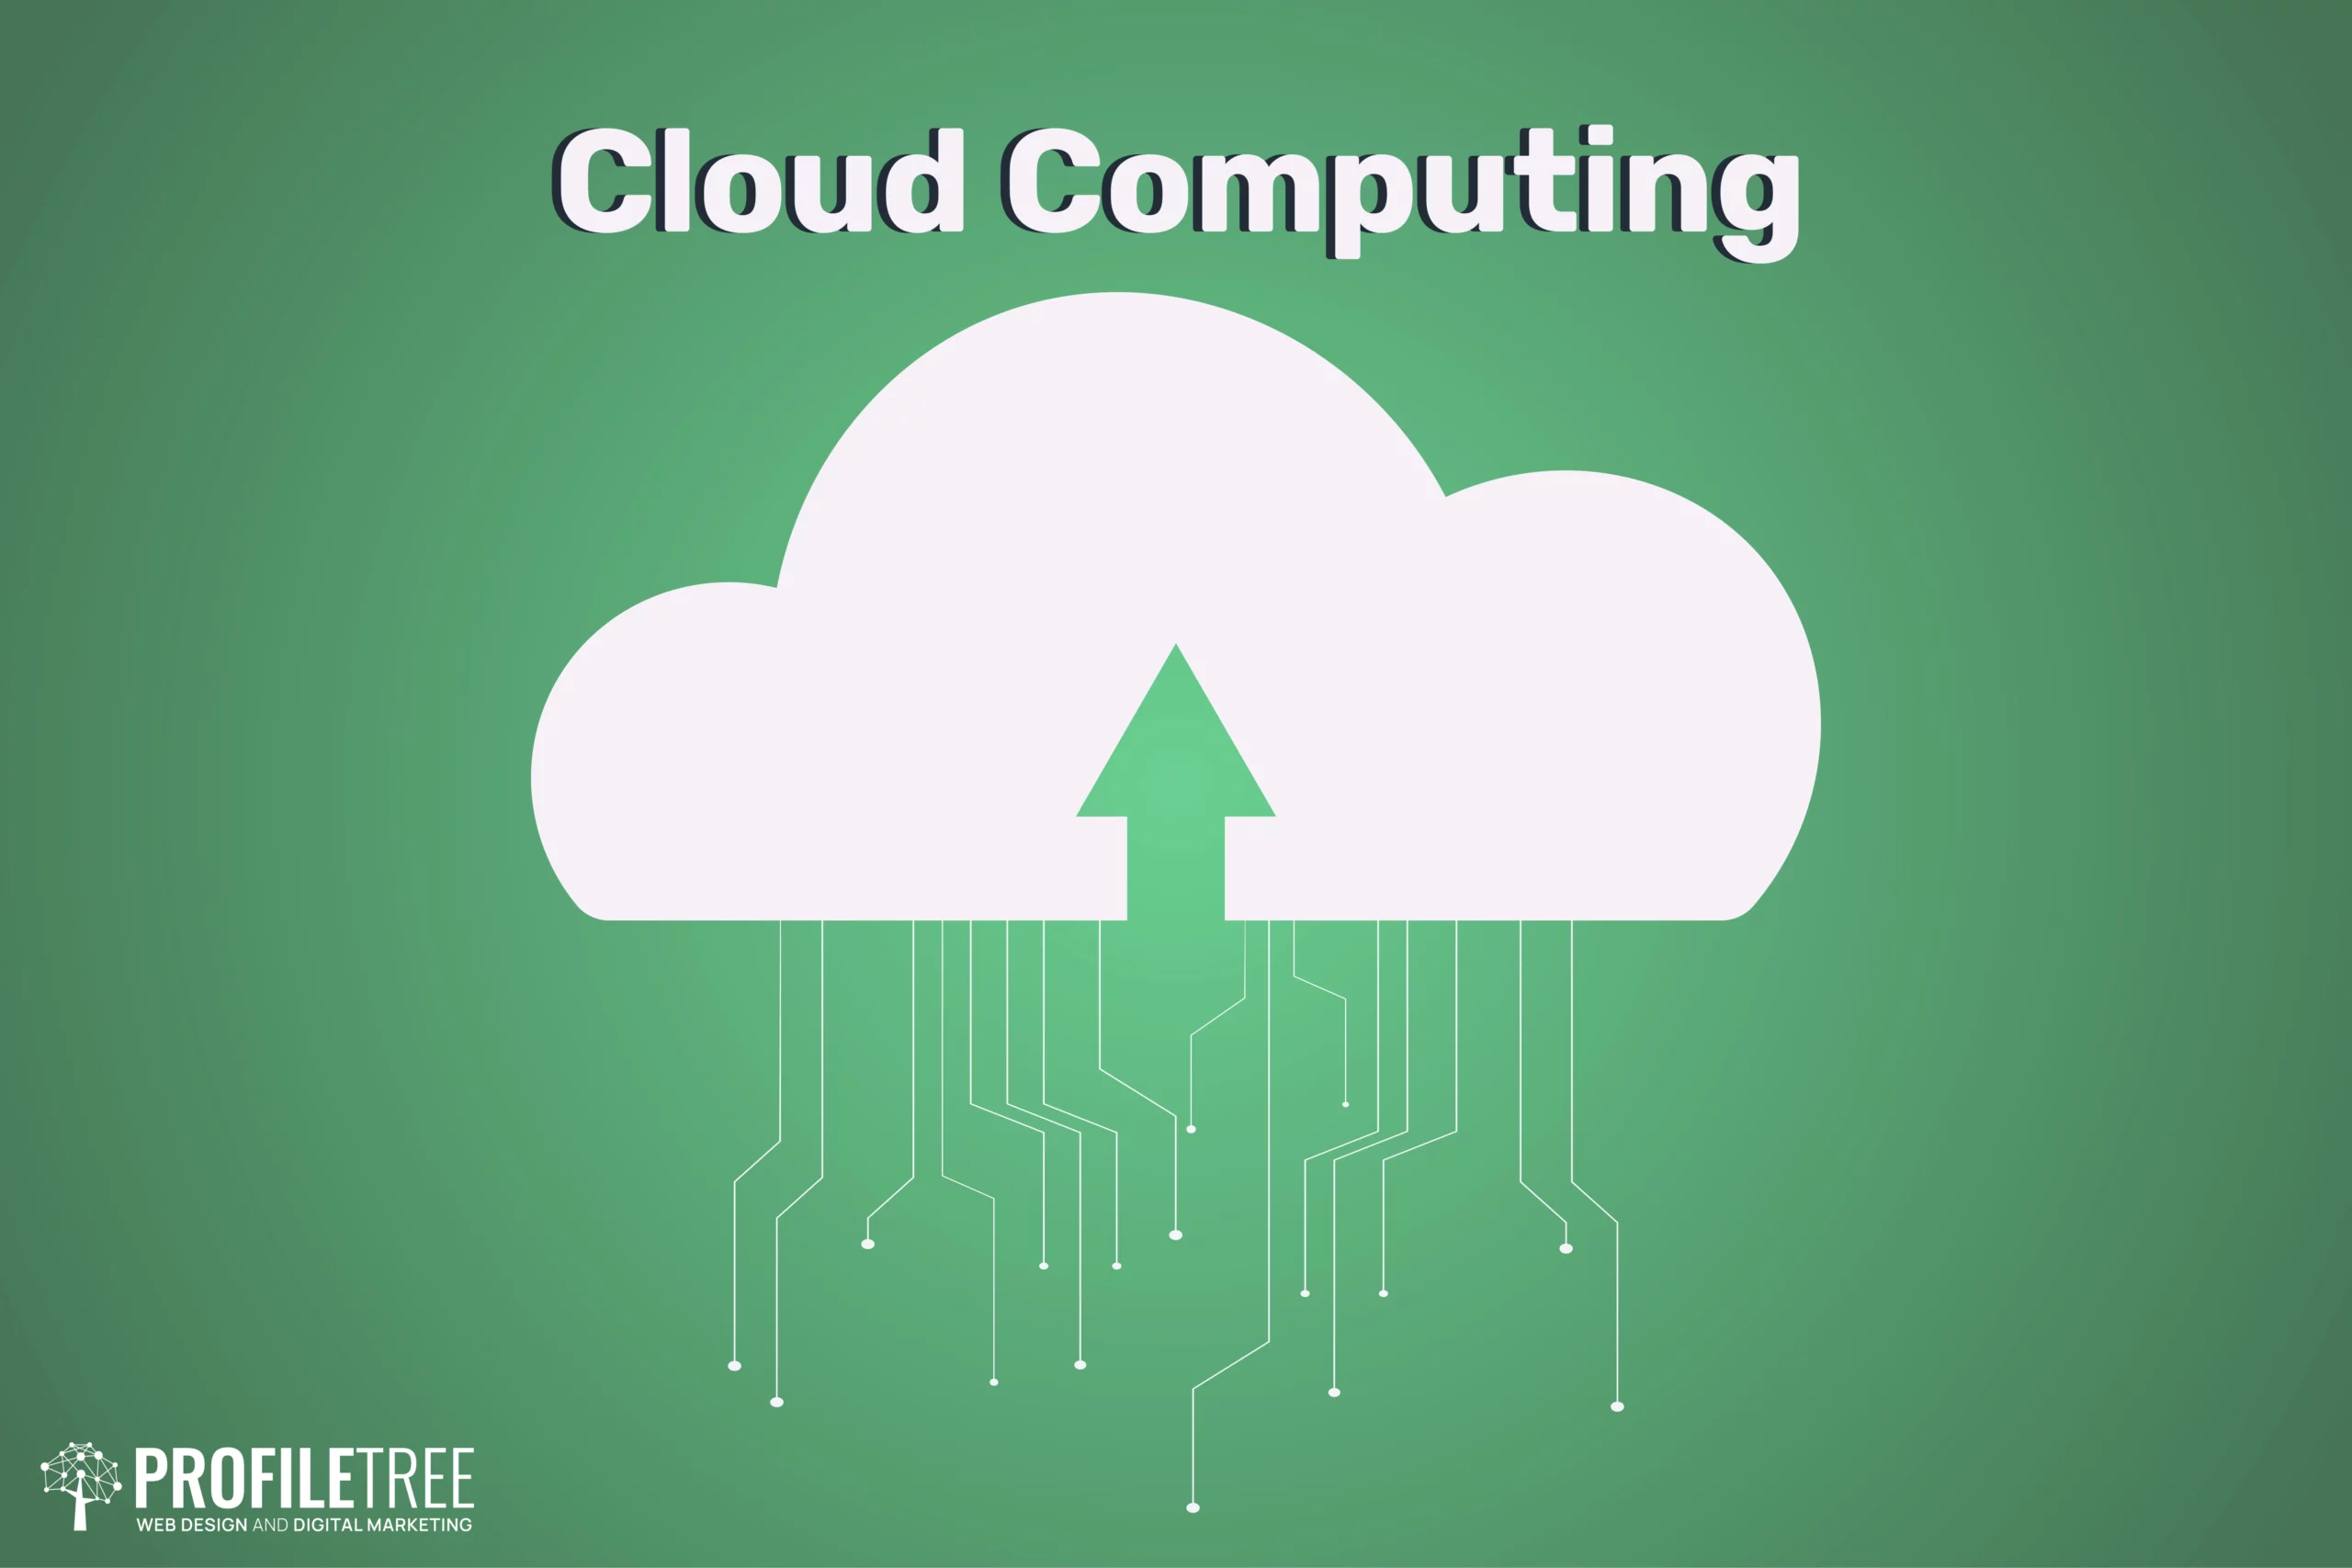 Overview of Internet of Things IoT and Cloud Computing | What is Cloud Computing?